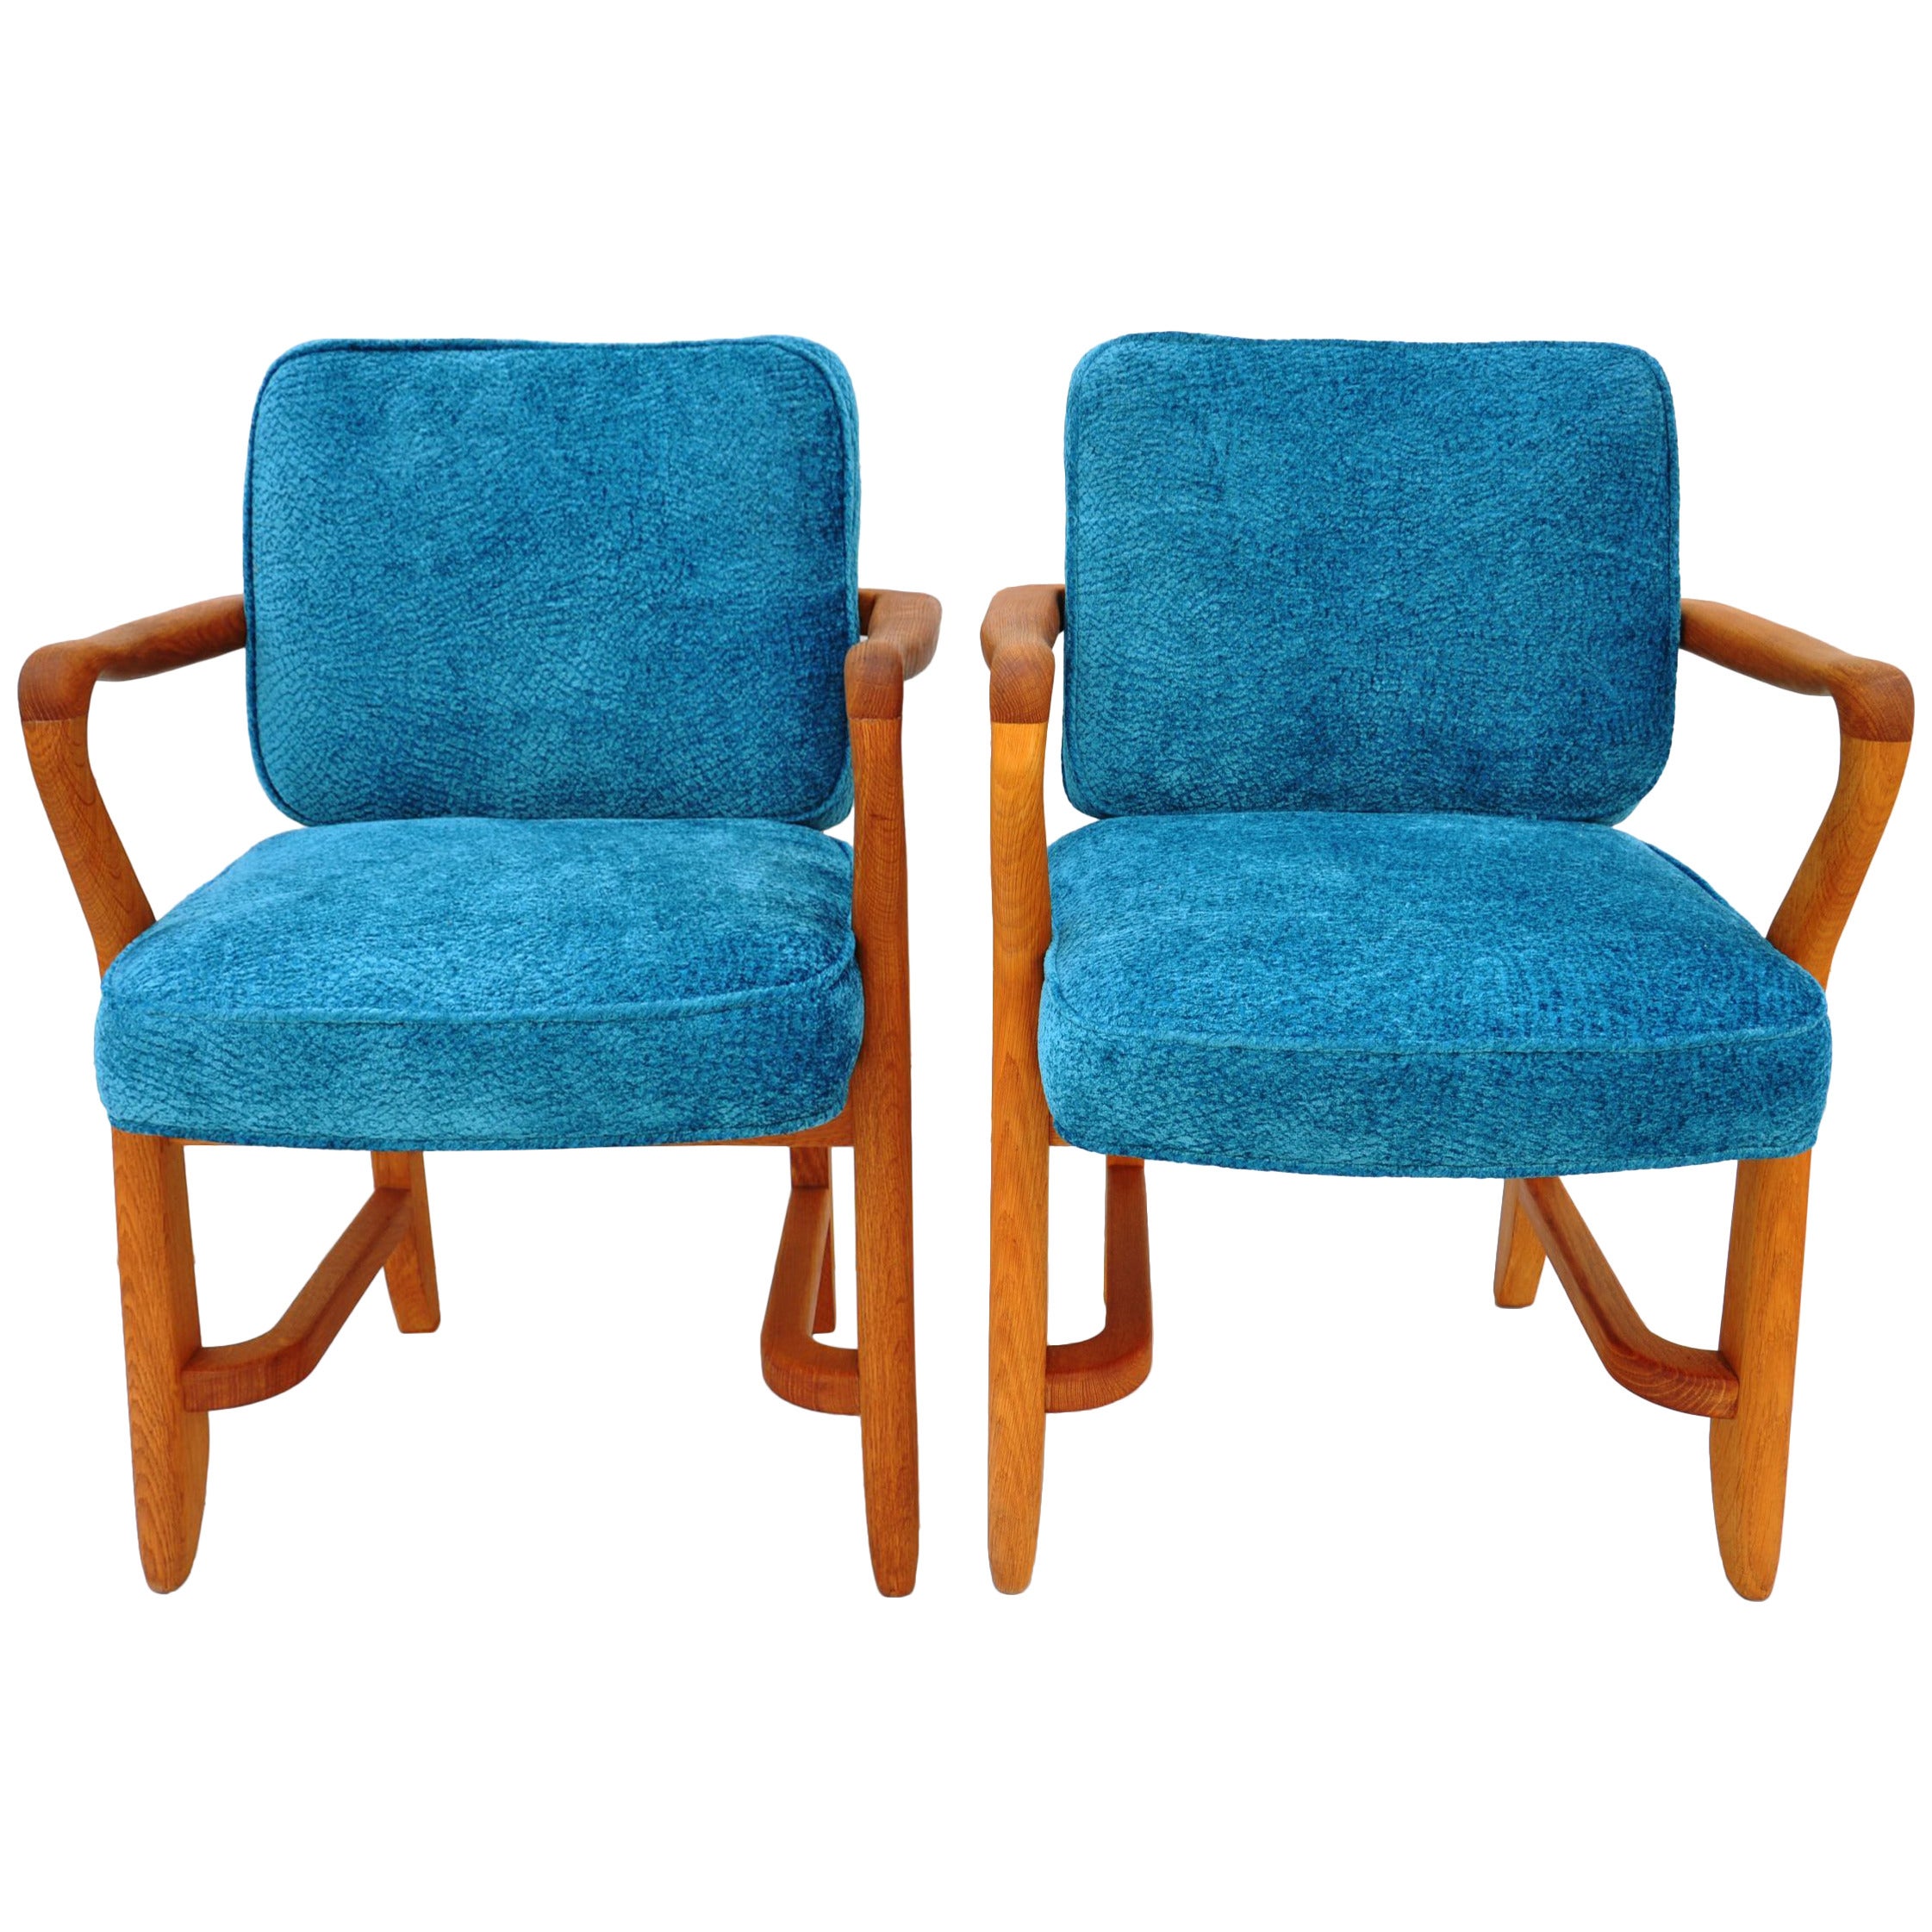 Pair of Vintage Mid Century Armchairs For Sale